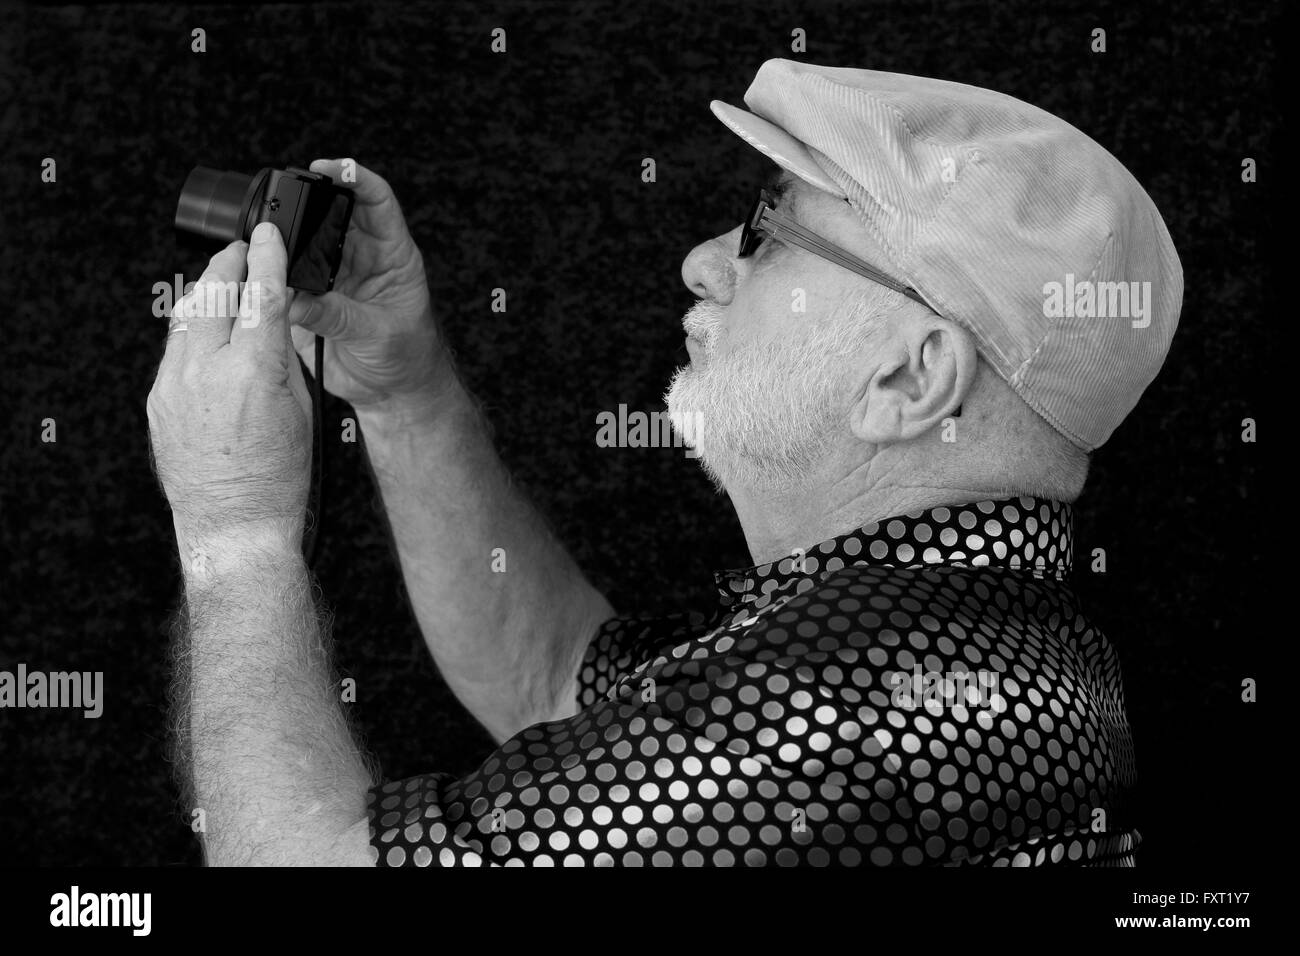 An old man with a camera in black and white. Stock Photo